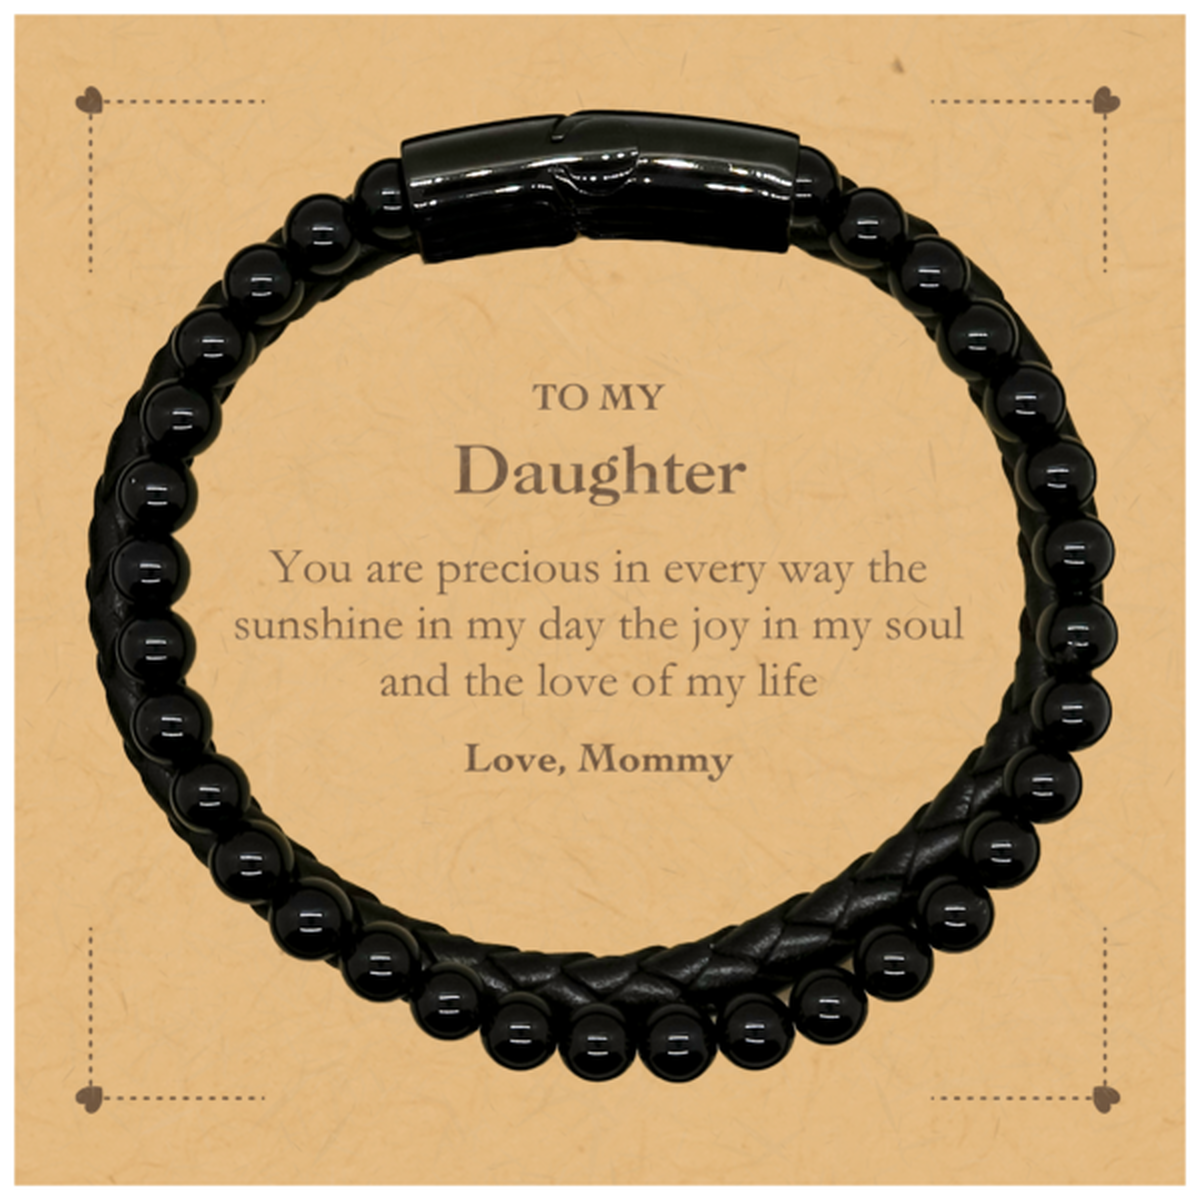 Graduation Gifts for Daughter Stone Leather Bracelets Present from Mommy, Christmas Daughter Birthday Gifts Daughter You are precious in every way the sunshine in my day. Love, Mommy